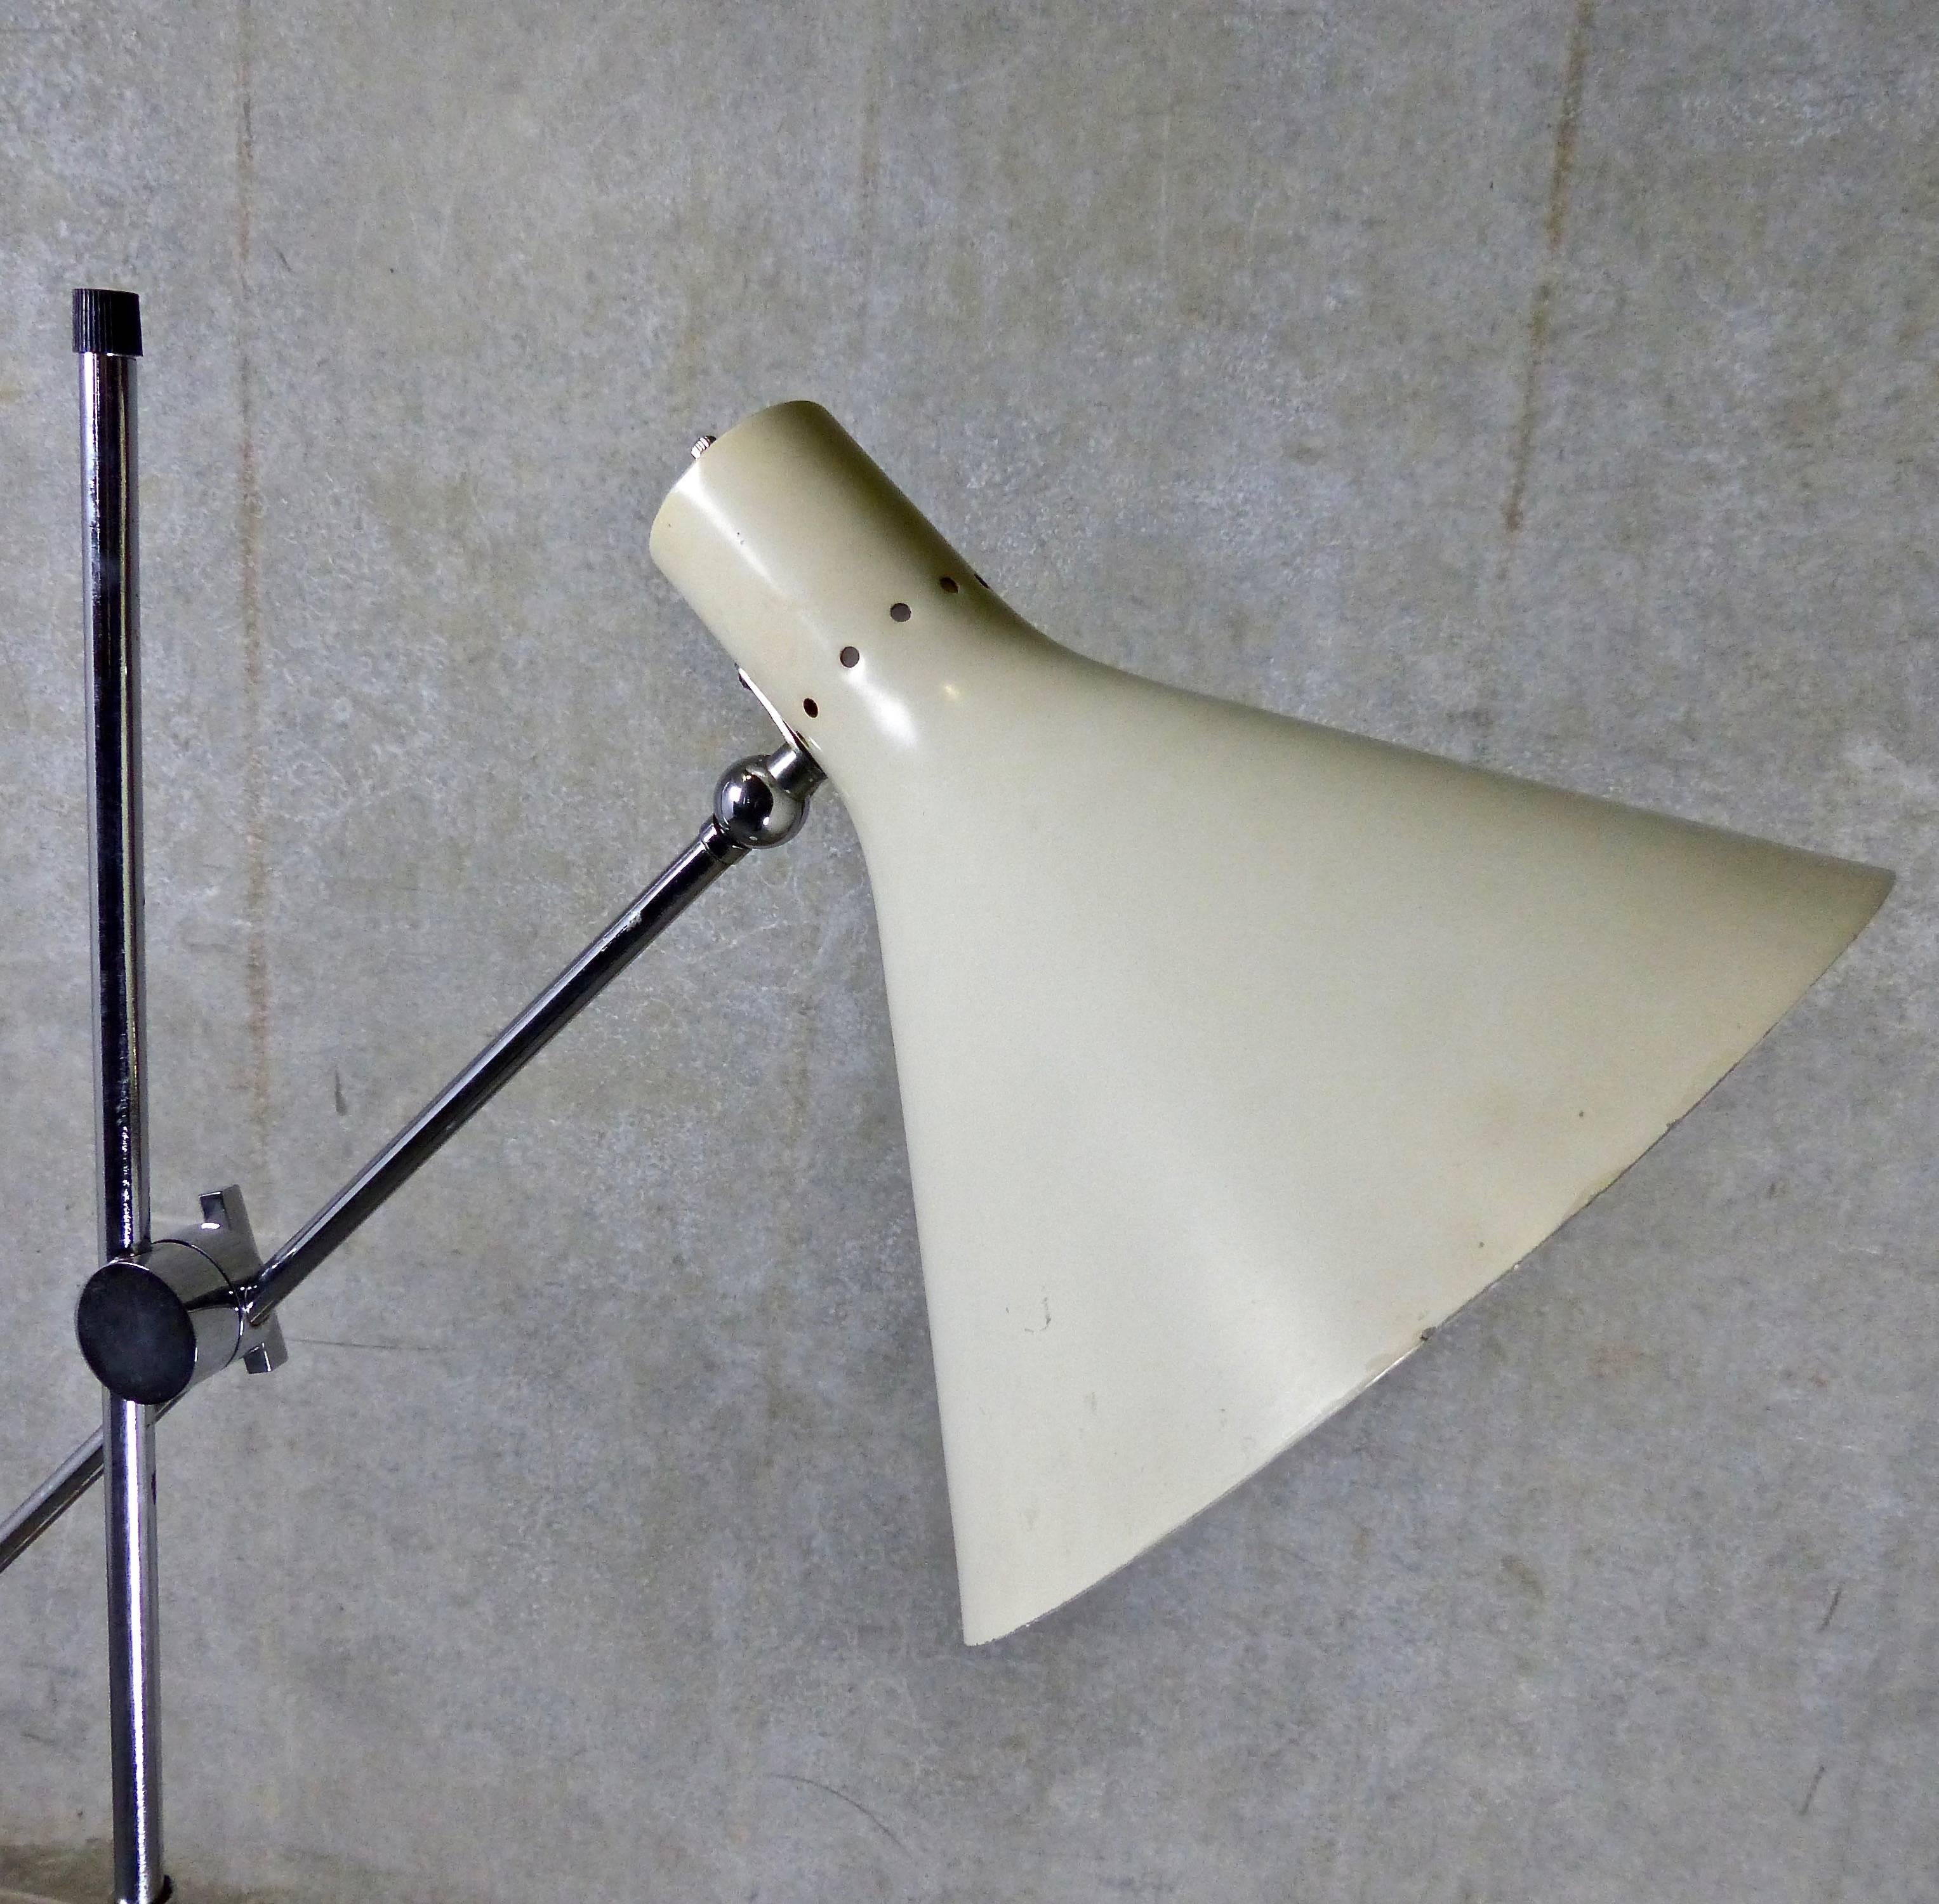 A one-armed articulating floor lamp attributed to Casey Fantin, Florence, for Arredoluce (imported into the USA by Raymor). The circa 1950 Italian chromed steel light features an off-white enamel perforated shade and black enameled stem, a